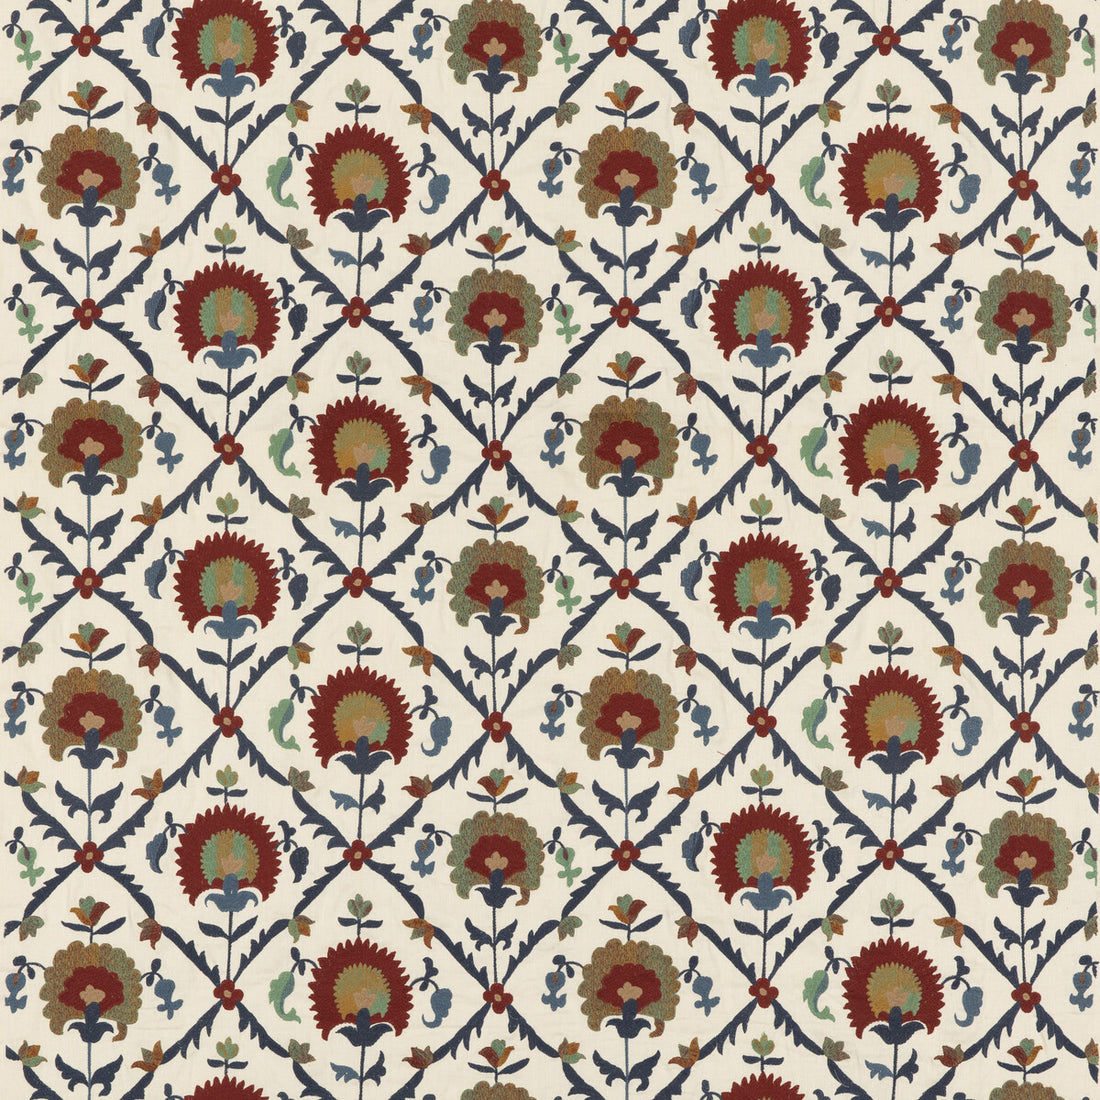 Winchelsea fabric in red/ blue color - pattern BF10905.1.0 - by G P &amp; J Baker in the Portobello collection